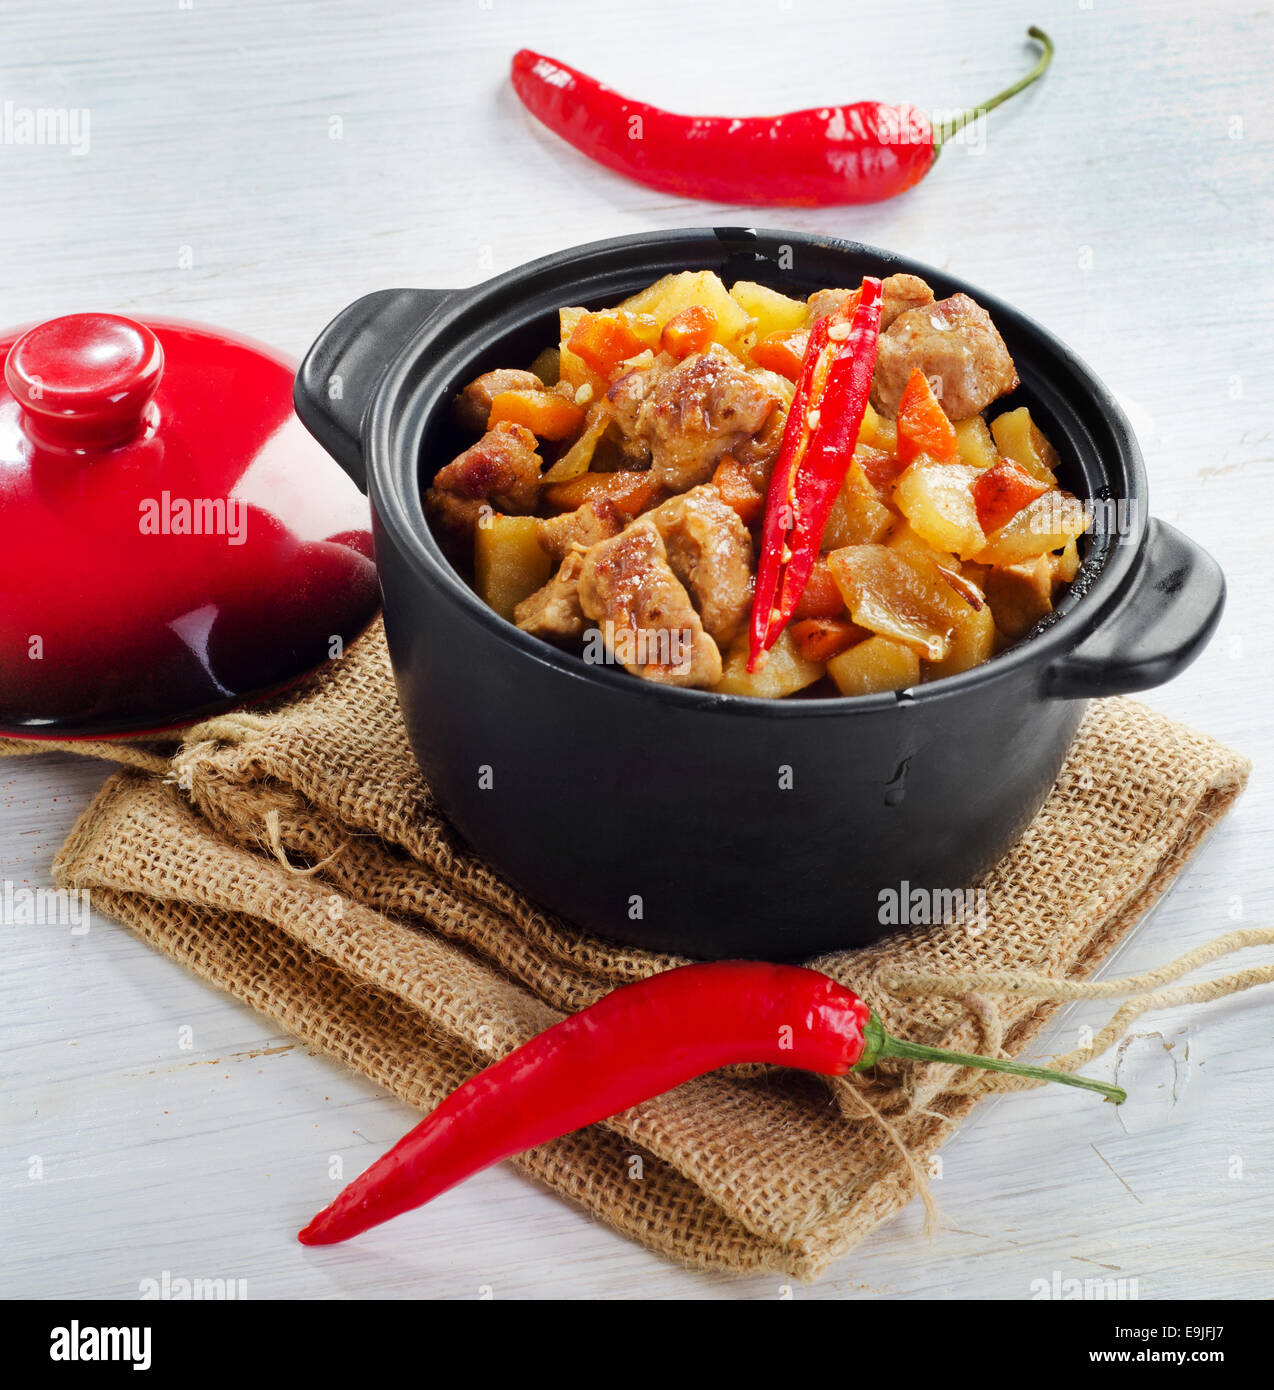 Vegetable and meat stew with chili peppers. Stock Photo